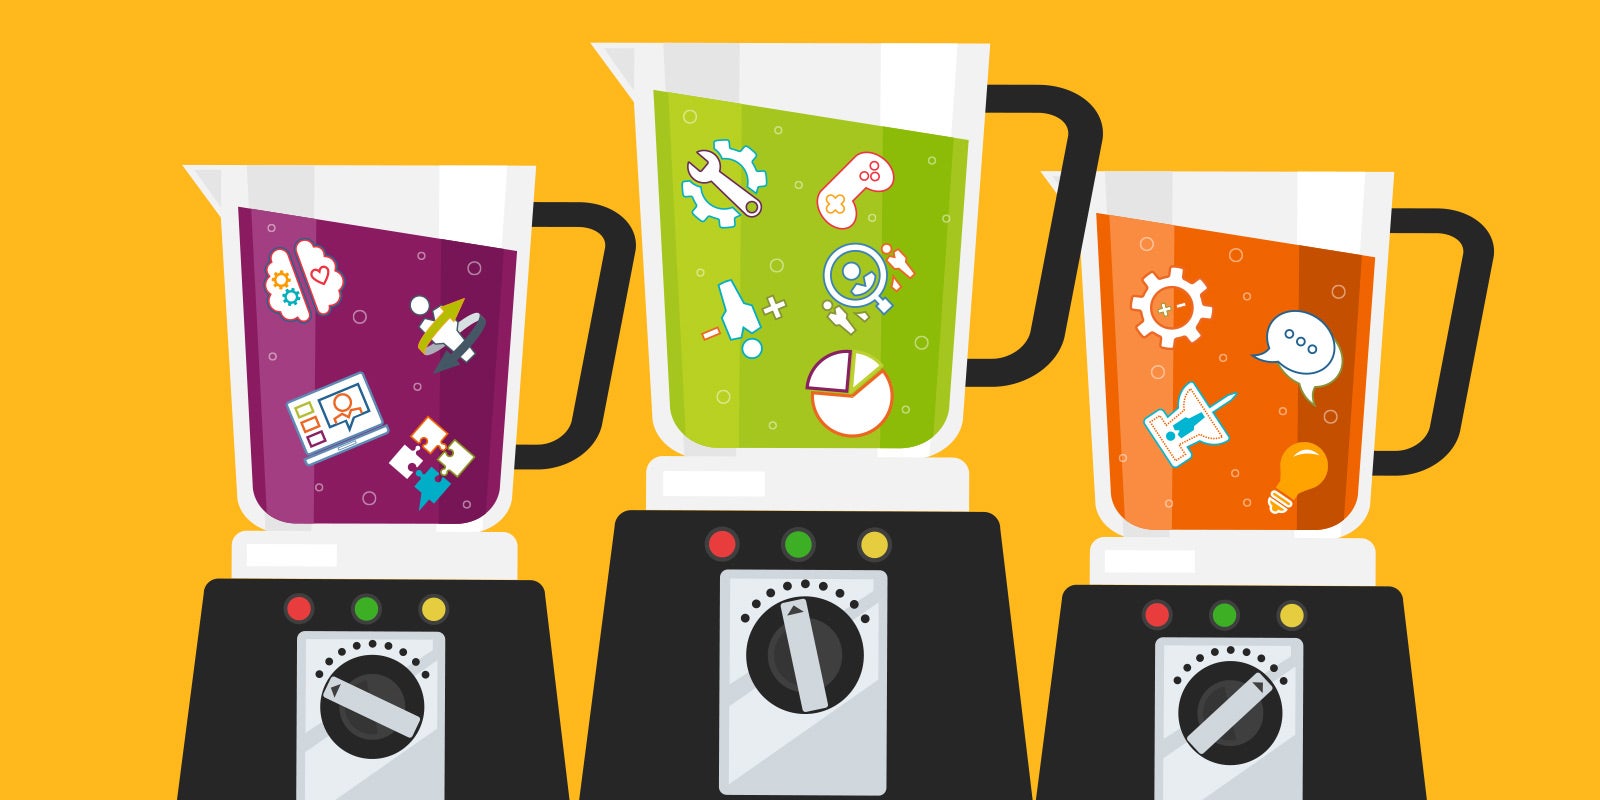 three illustrated blenders with different icons and images that represent different blended learning strategies floating in each blender's juice